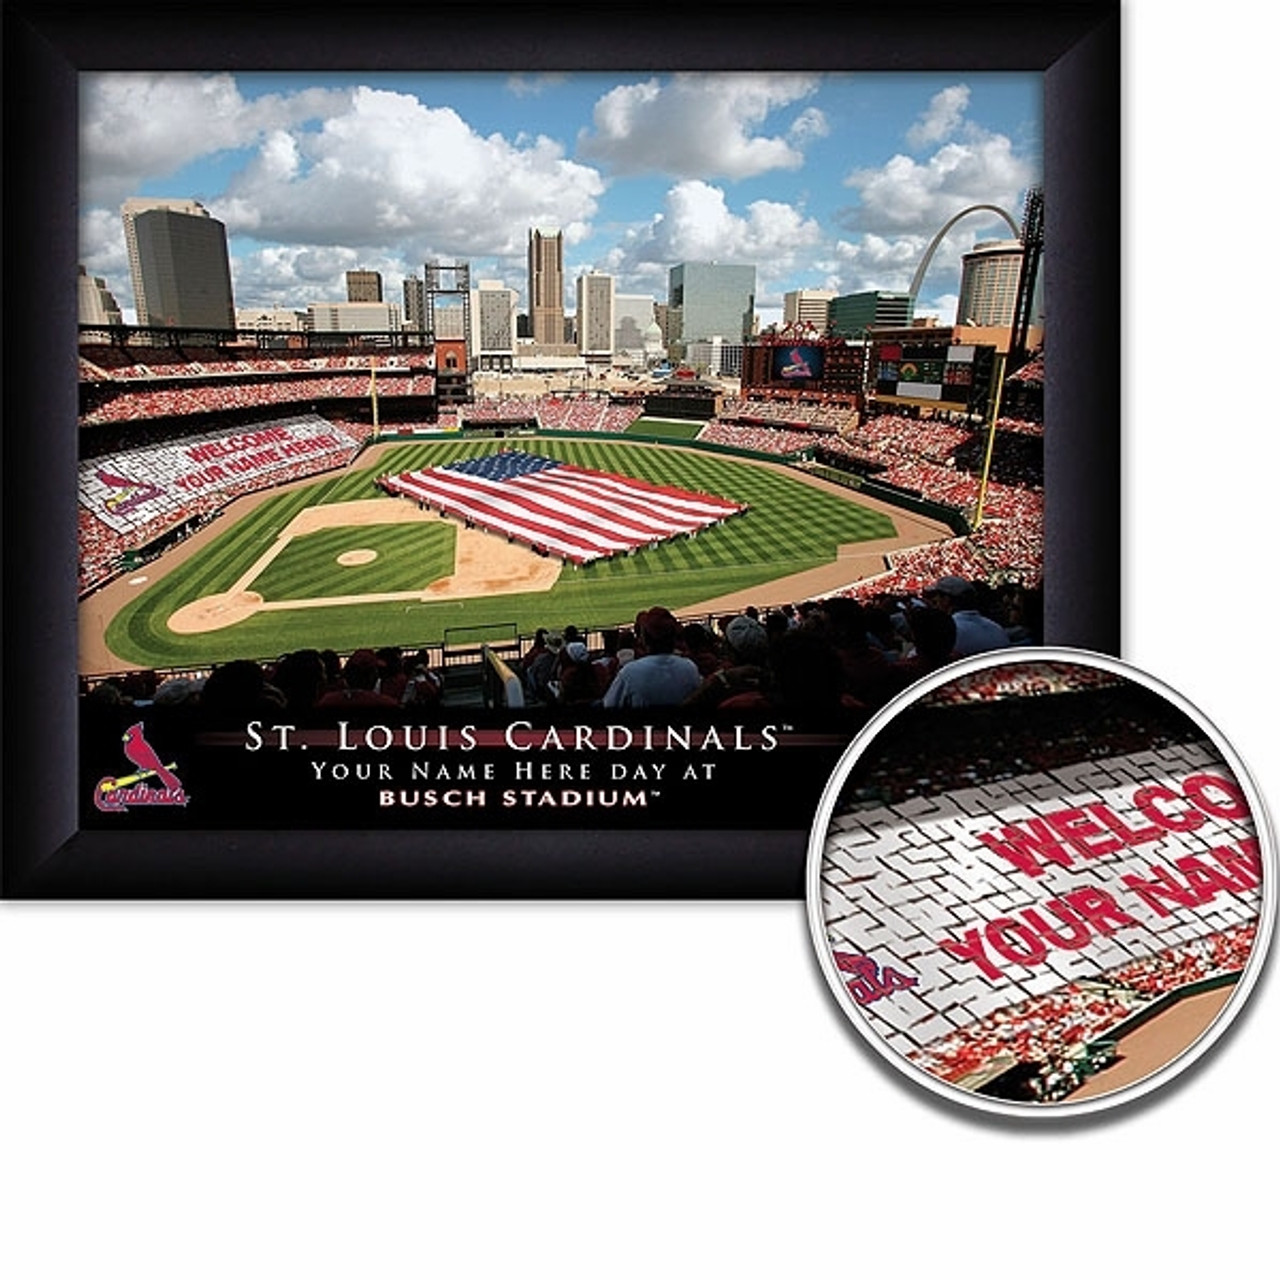 Baseball Wall Decals - Baseball Team Logos - St Louis Cardinals Logo -  Promotional Products - Custom Gifts - Party Favors - Corporate Gifts -  Personalized Gifts